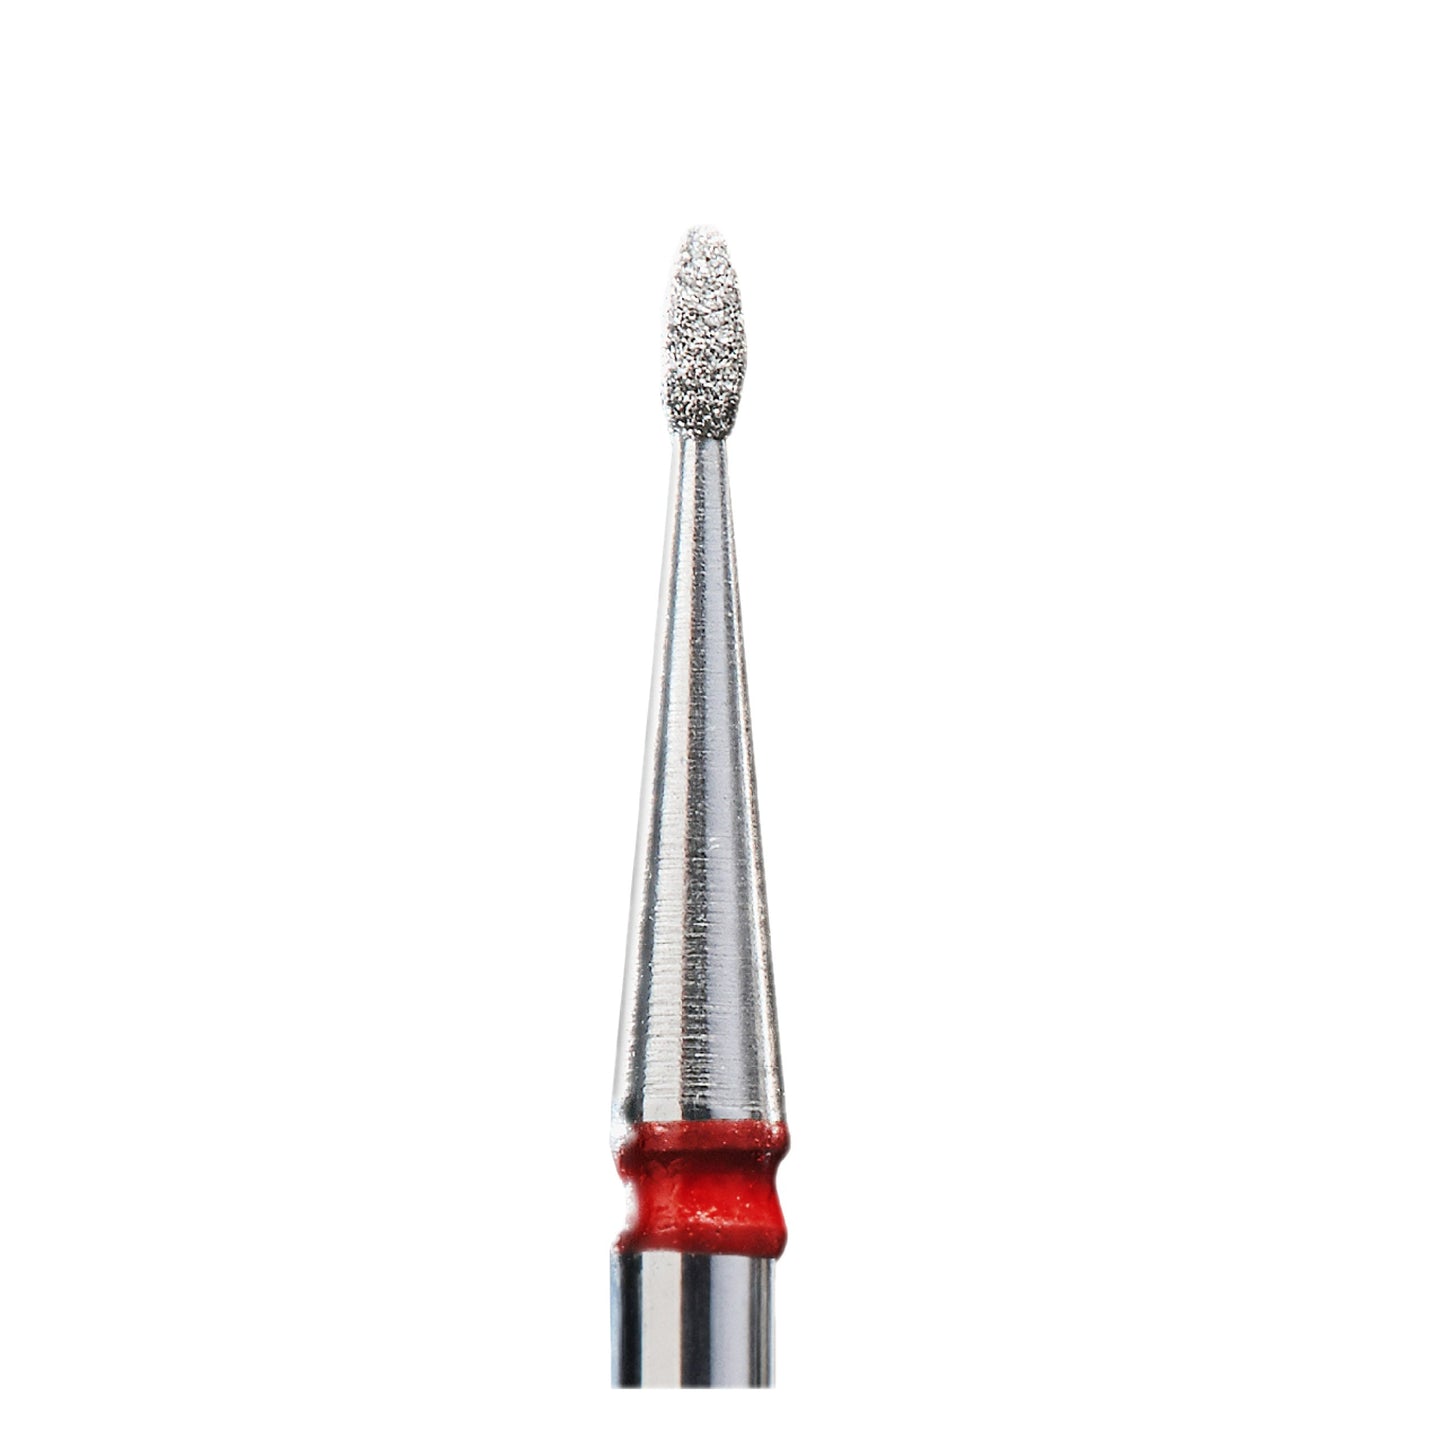 Diamond nail drill bit, rounded “bud” , red, head diameter 1.6 mm/ working part 4 mm